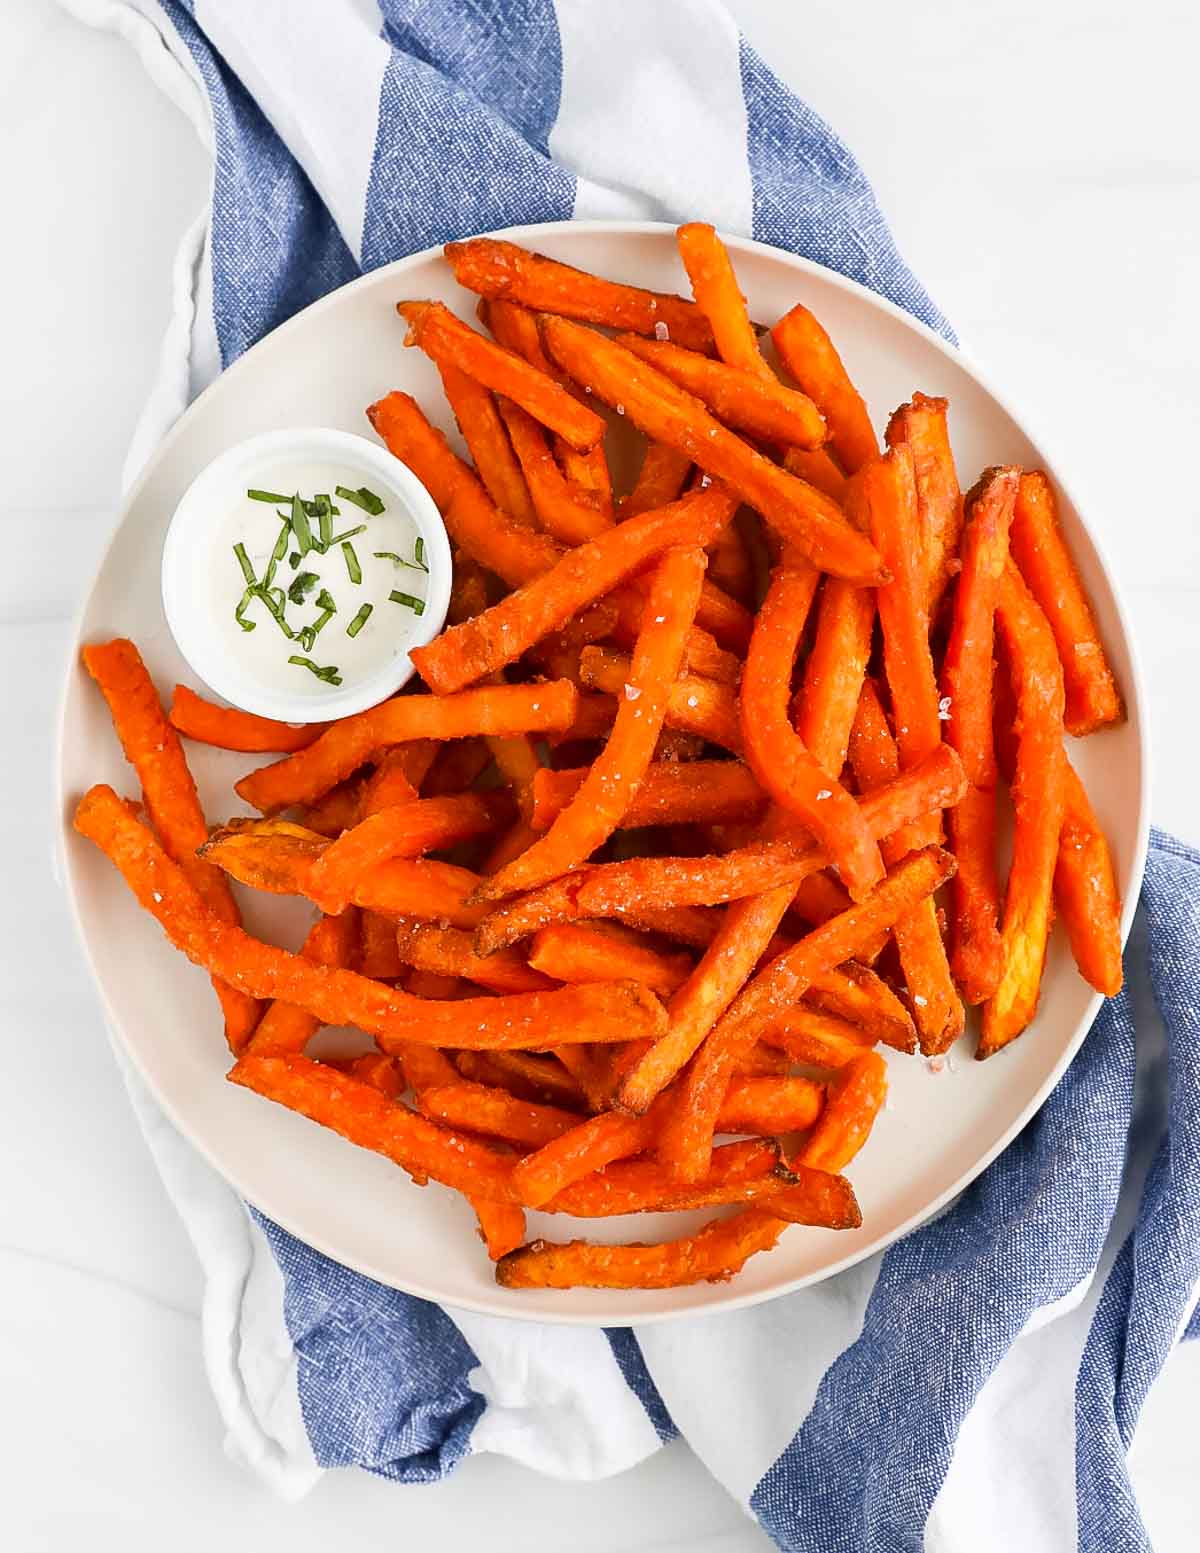 Sweet potato fries covered in salt on a white plate along with a white dish filled with ranch dressing.